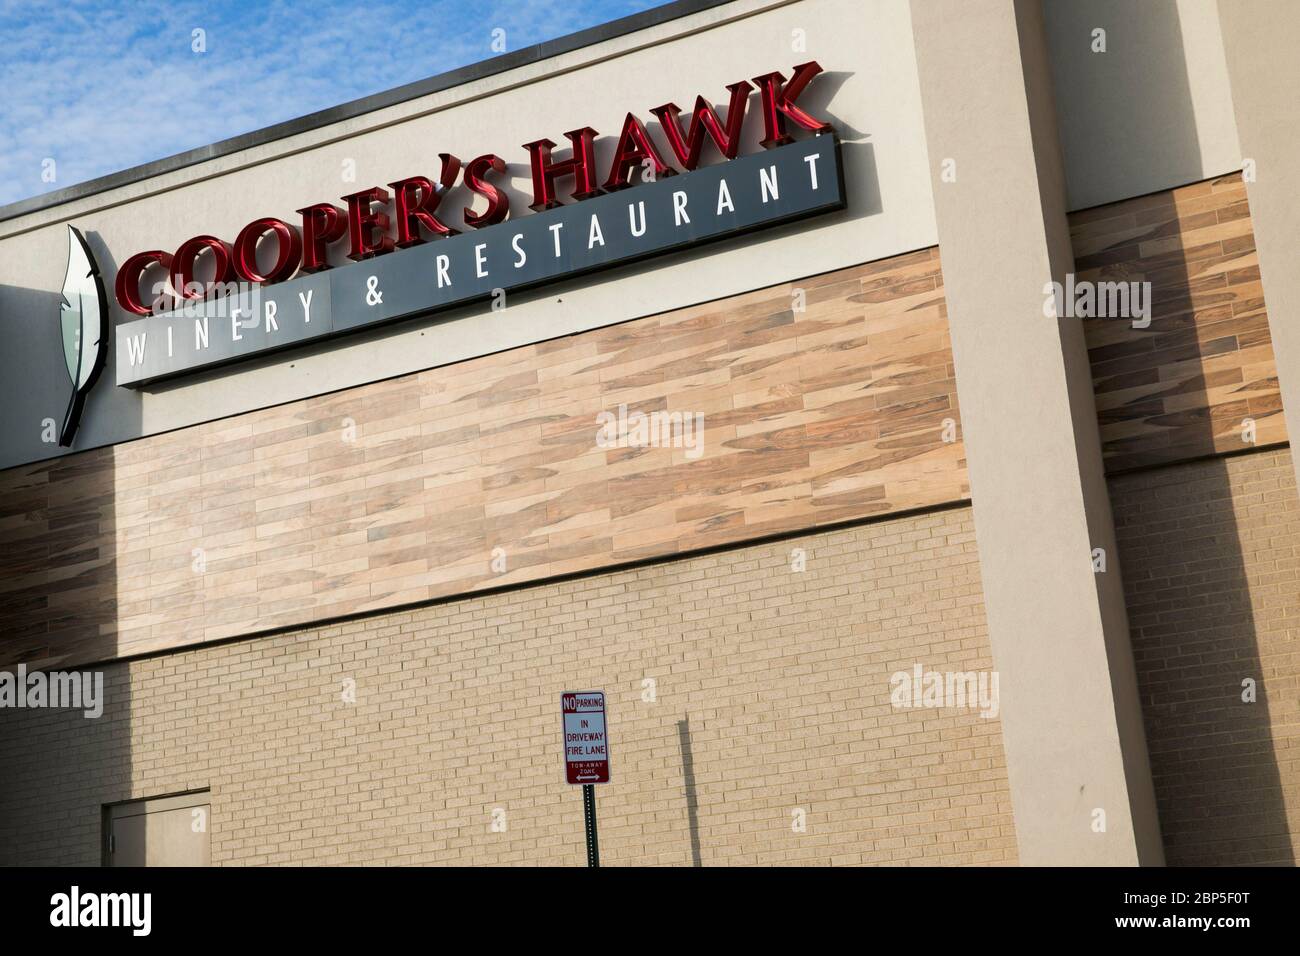 A logo sign outside of a Cooper's Hawk Winery & Restaurant location in Richmond, Virginia on May 13, 2020. Stock Photo